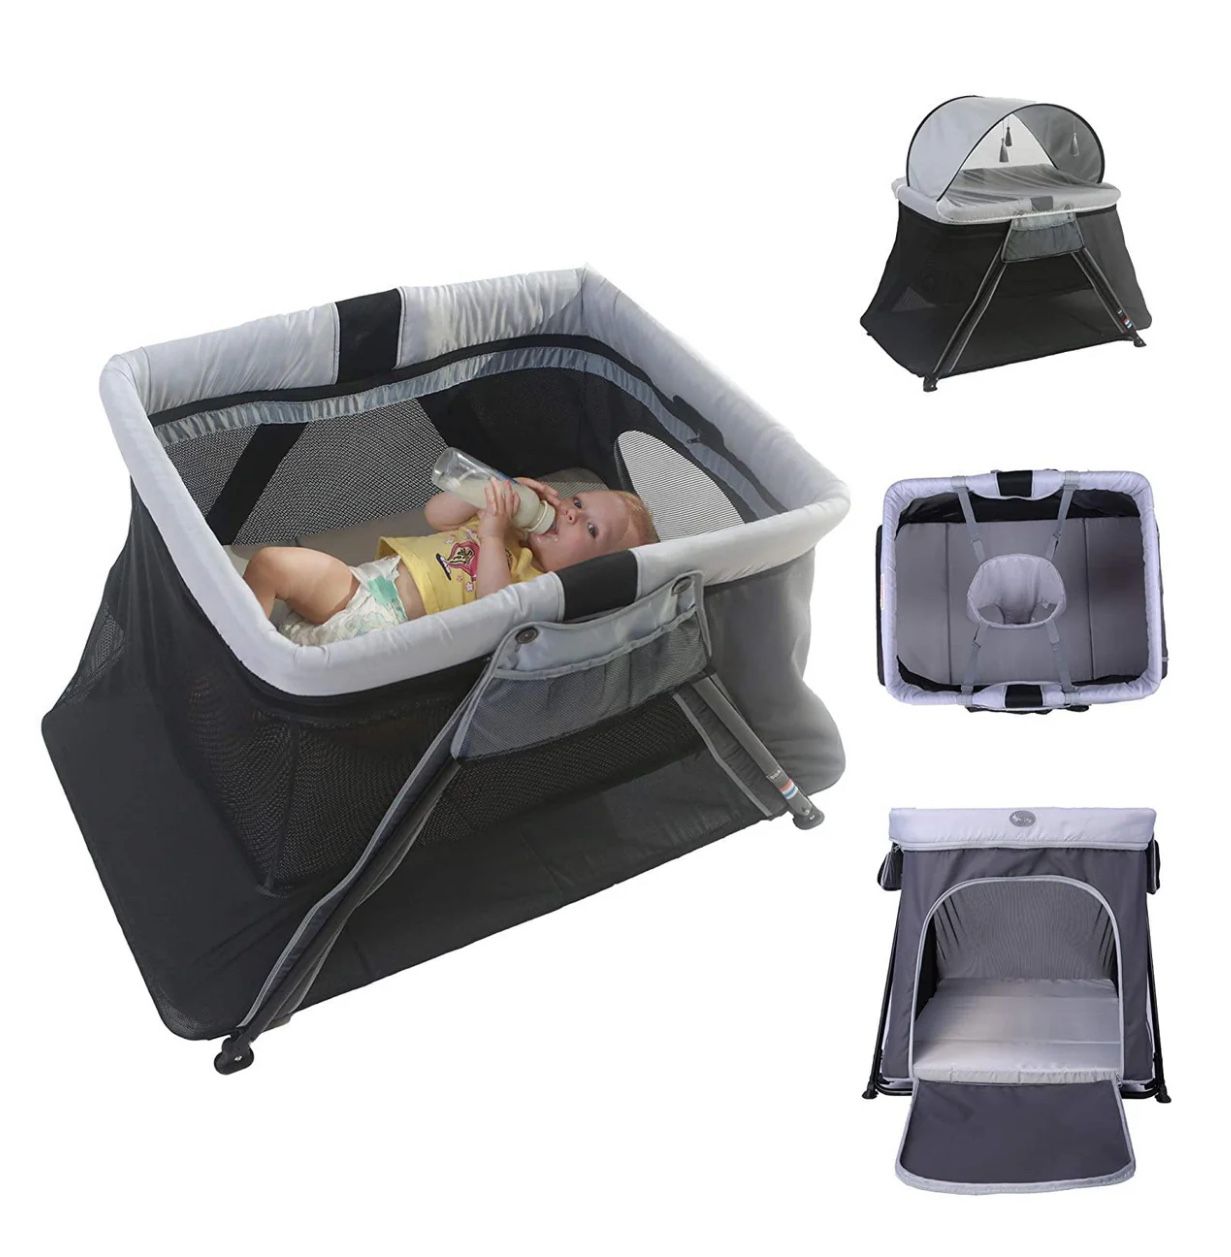  4 in 1 Foldable Baby Toddlers Crib Bassinet Playpen Playard with 2-Stage Mattress & Carry Bag